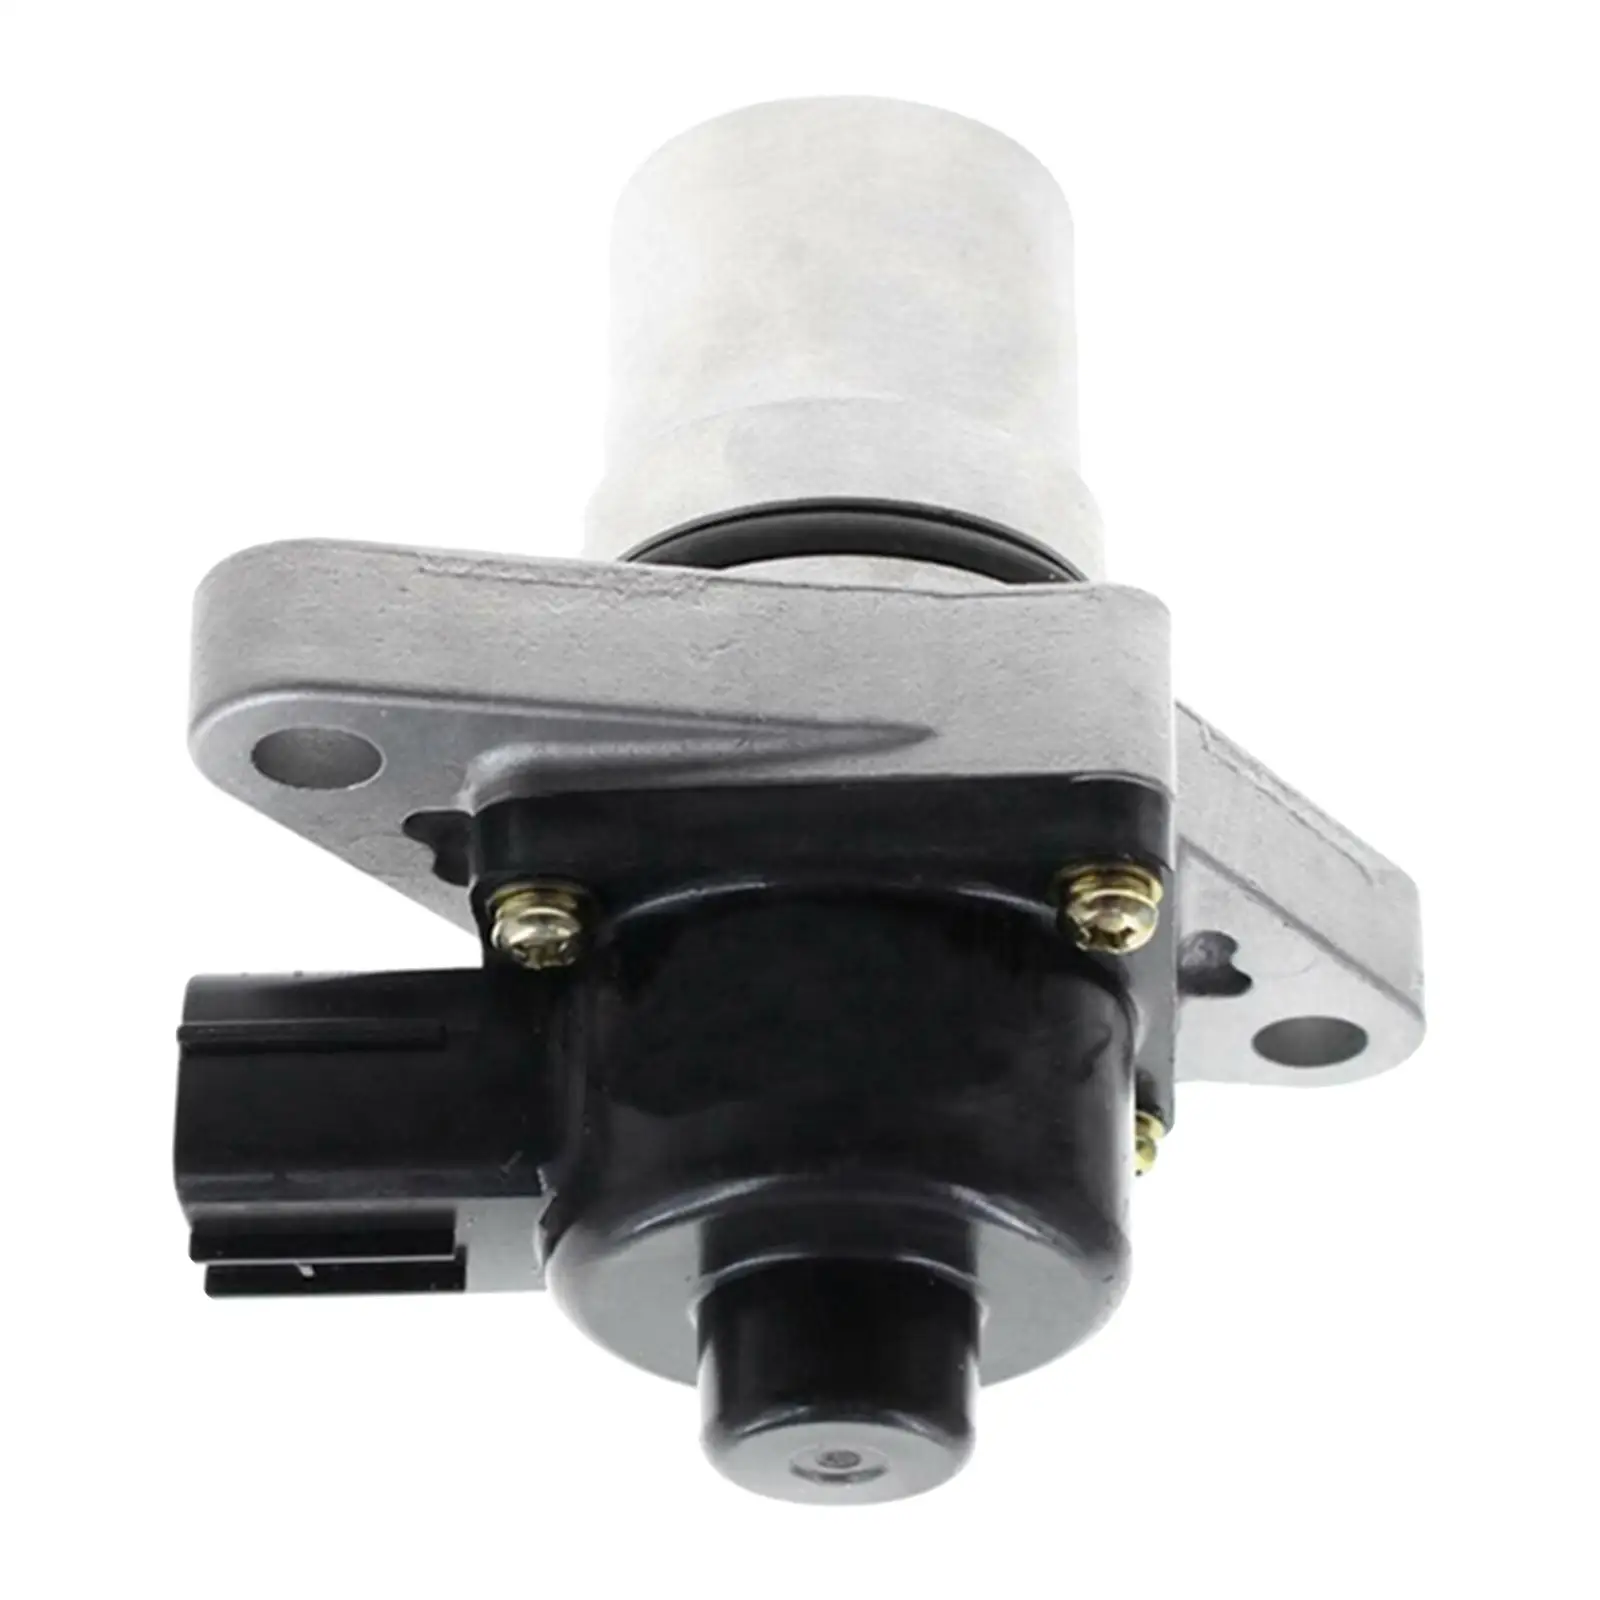 Egr Plug 14710-Ed000 Replaces Fit for Cube HR15D MR20 MR20DE Easy to Install